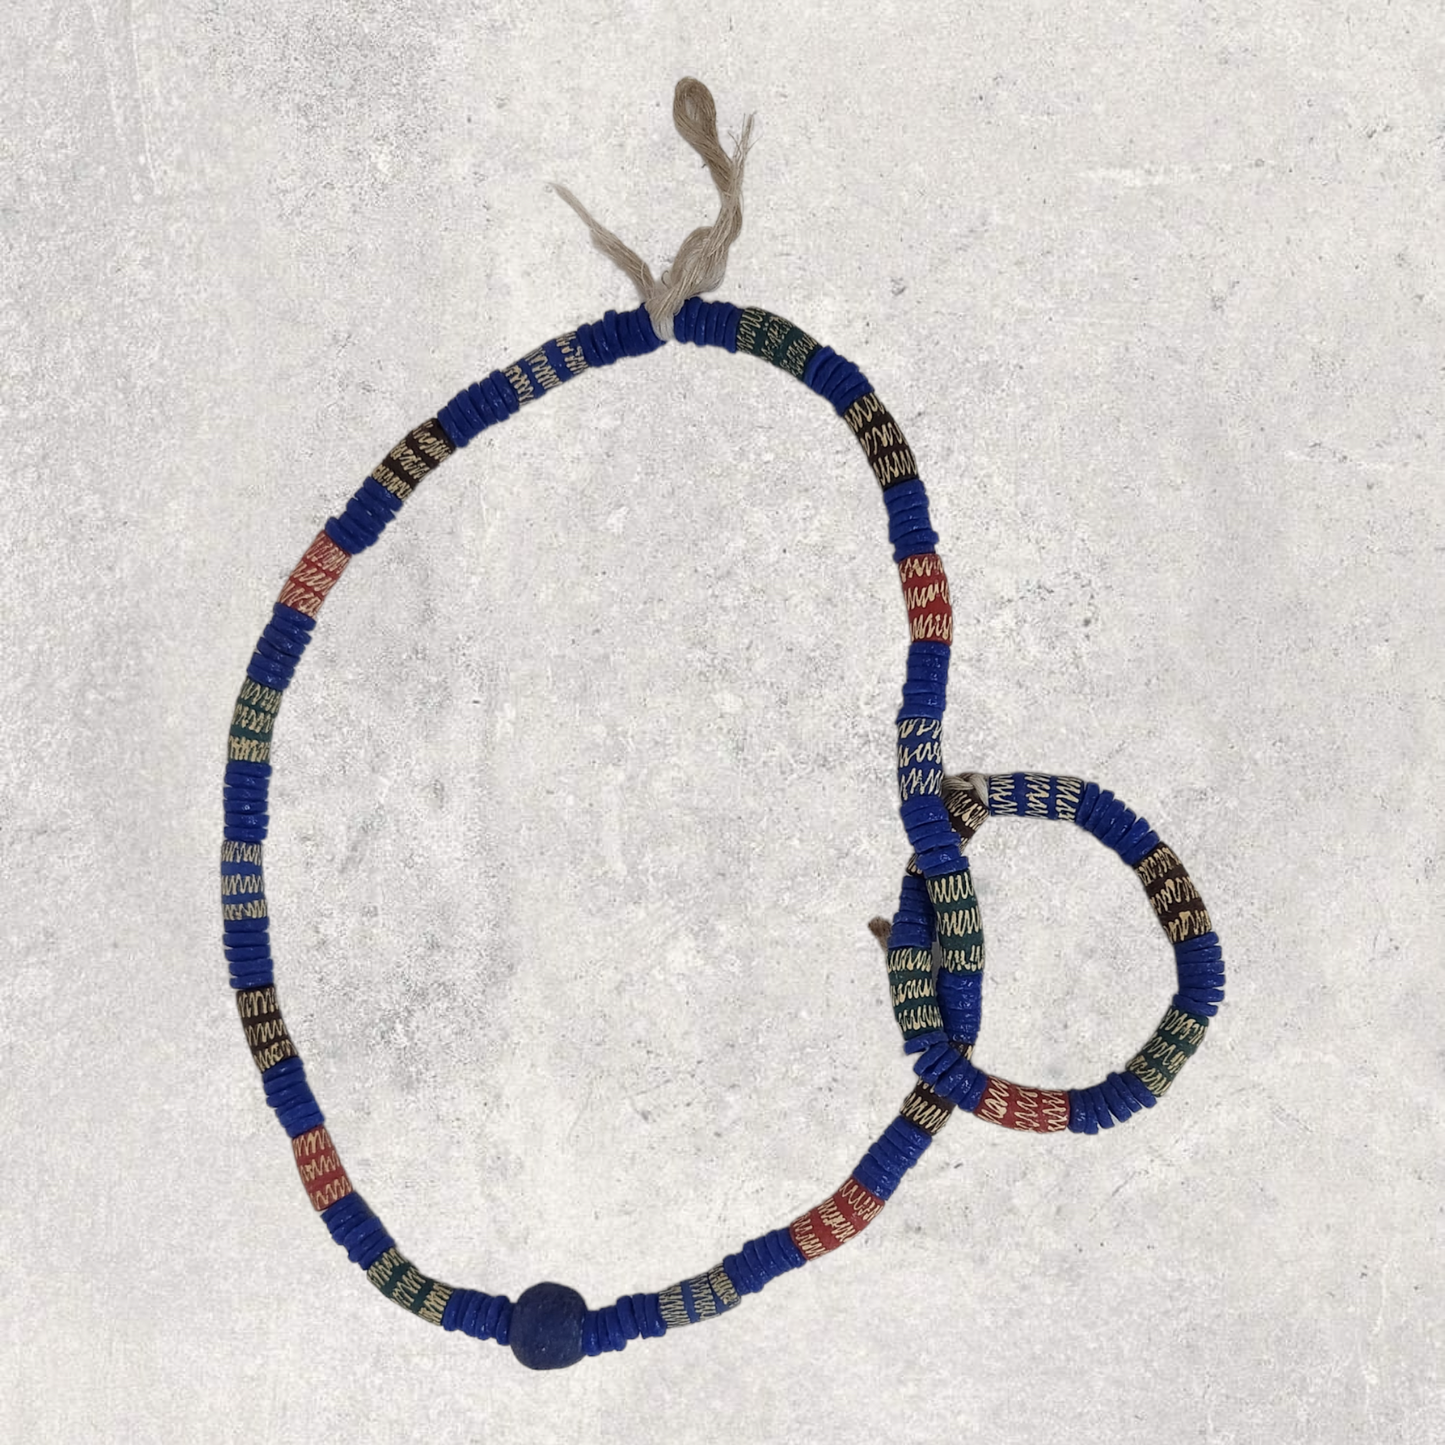 Glass bead necklace & Bracelet from Ghana ( 20th Century) - MD African Art